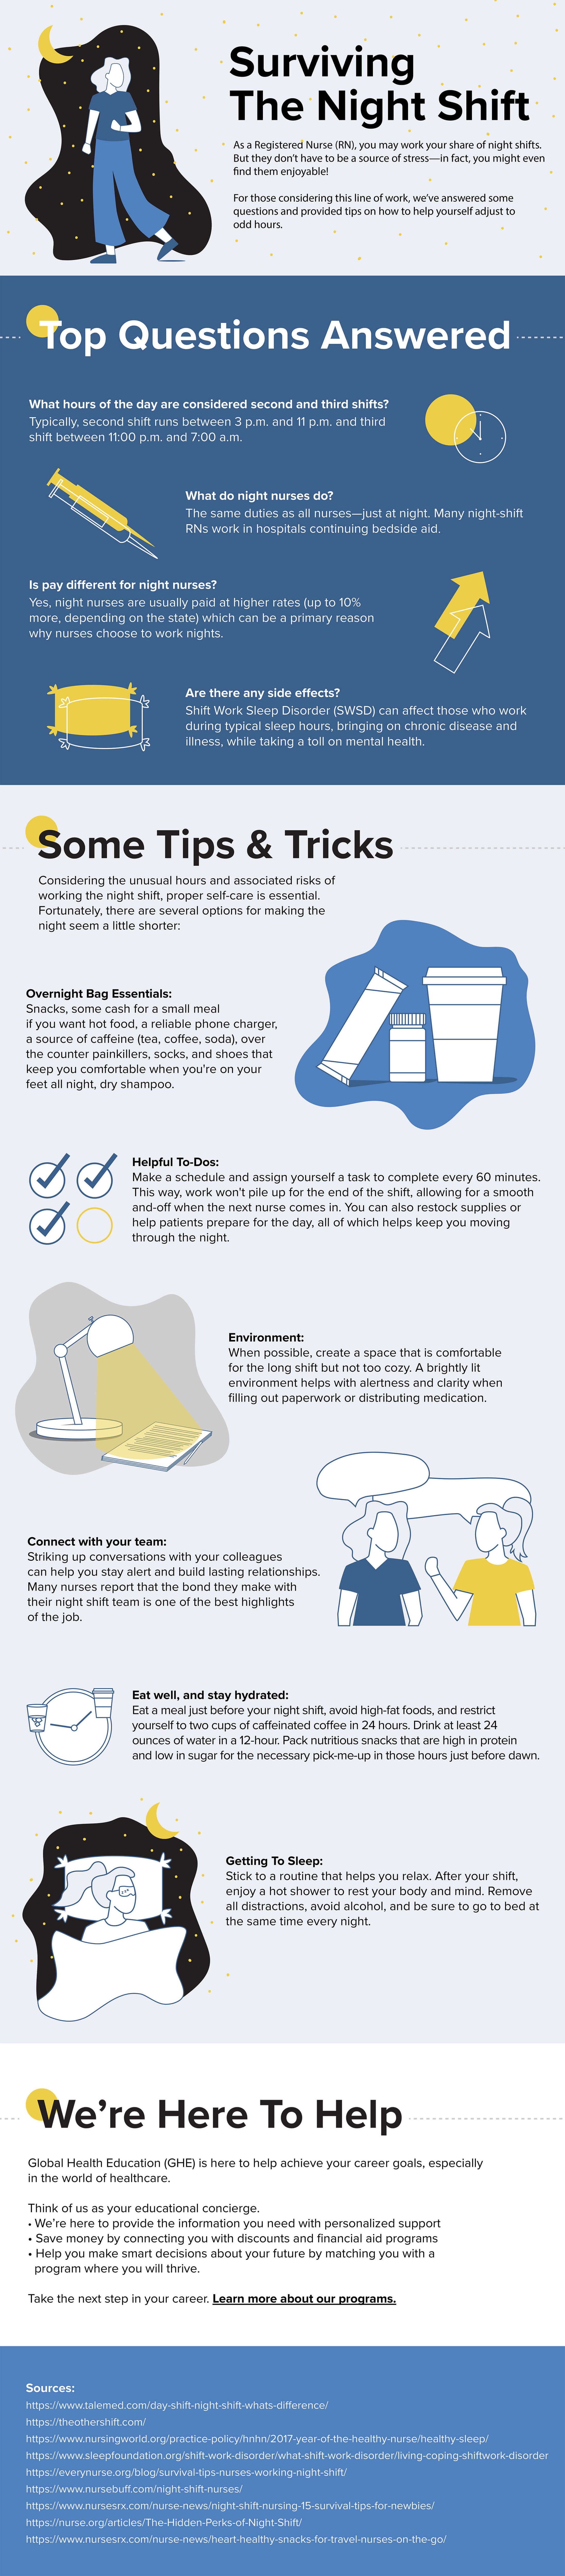 Surviving the Night Shift Infographic